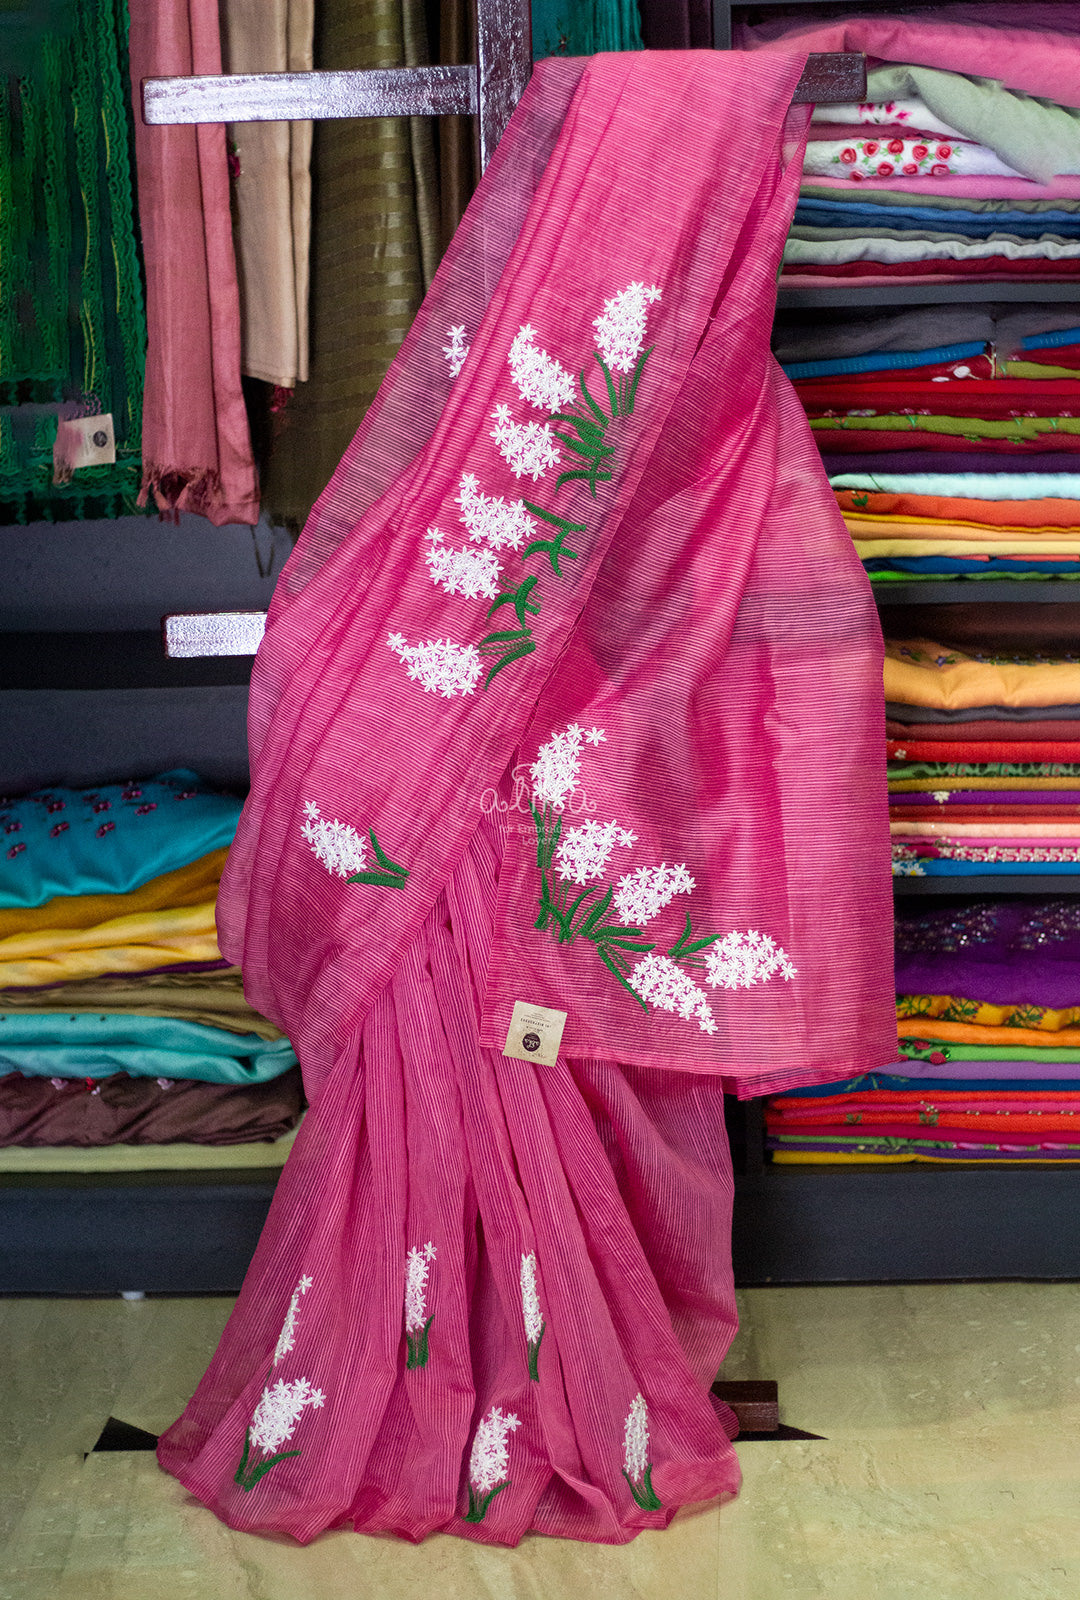 PINK  STRIPED KOTA SAREE  WITH WHITE LAZY DAISY FLORAL WORK